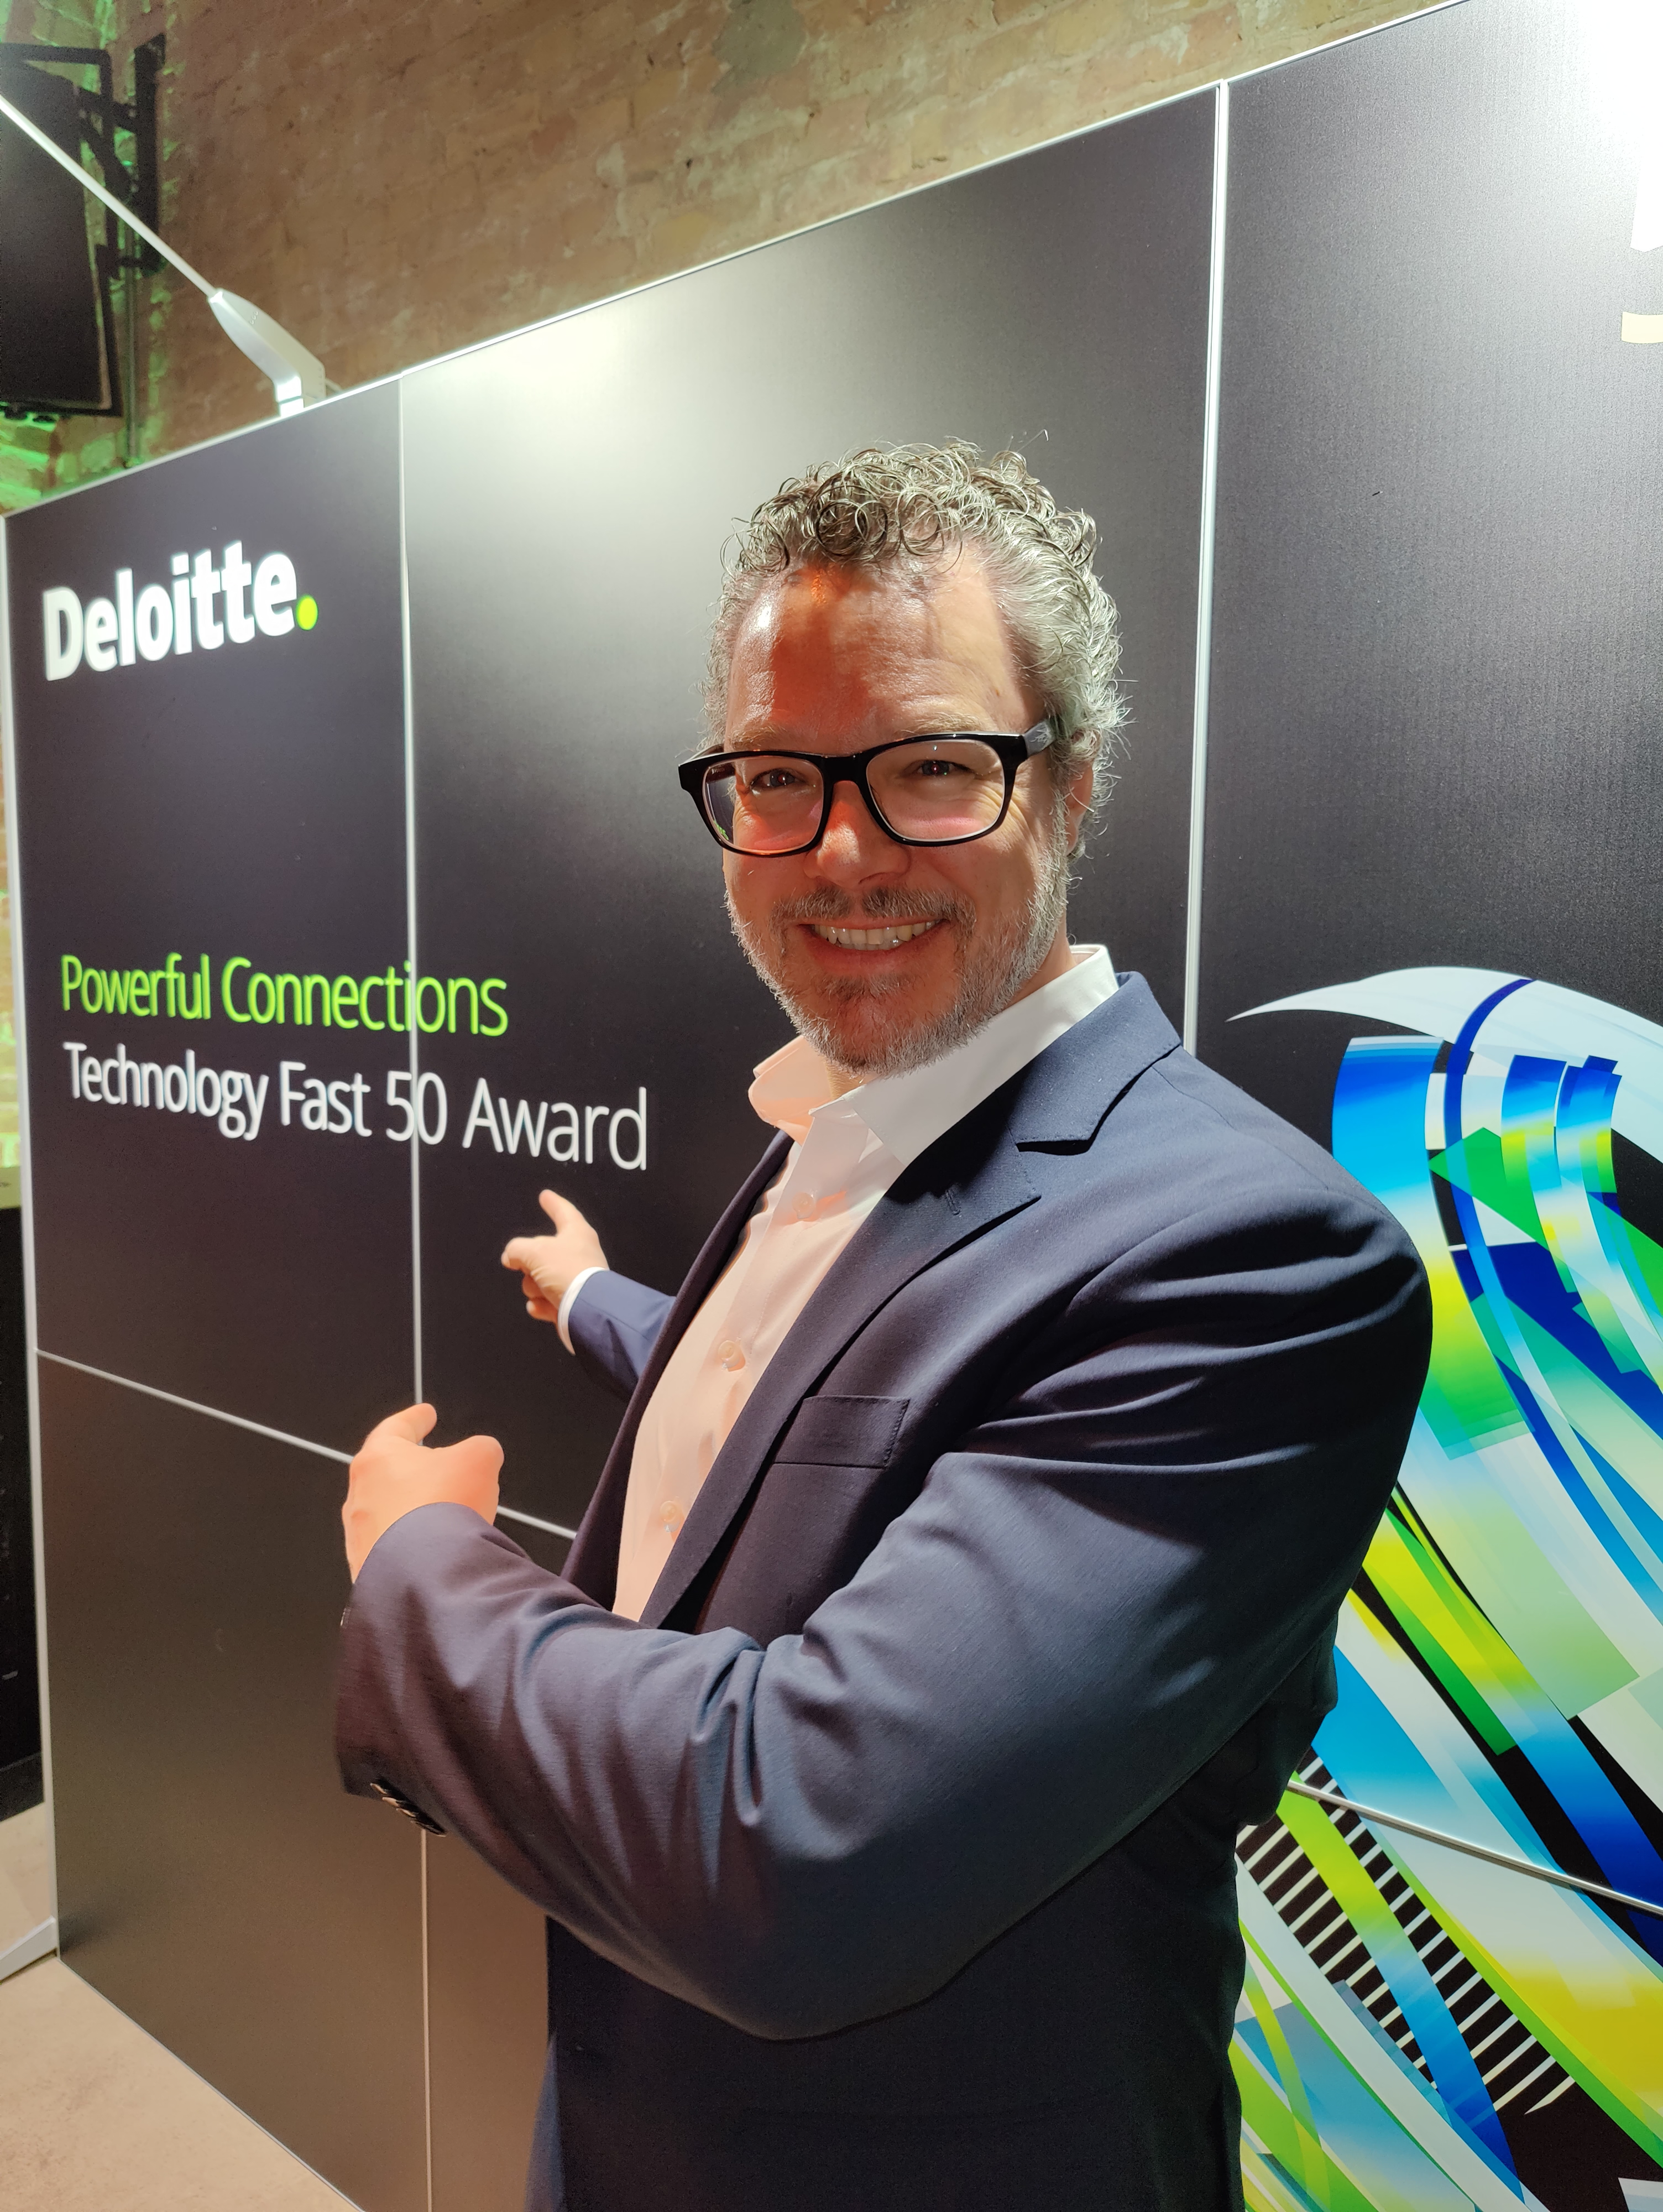 Andy Muthmann, Managing Director of croit attends Deloitte Fast 50 Award.